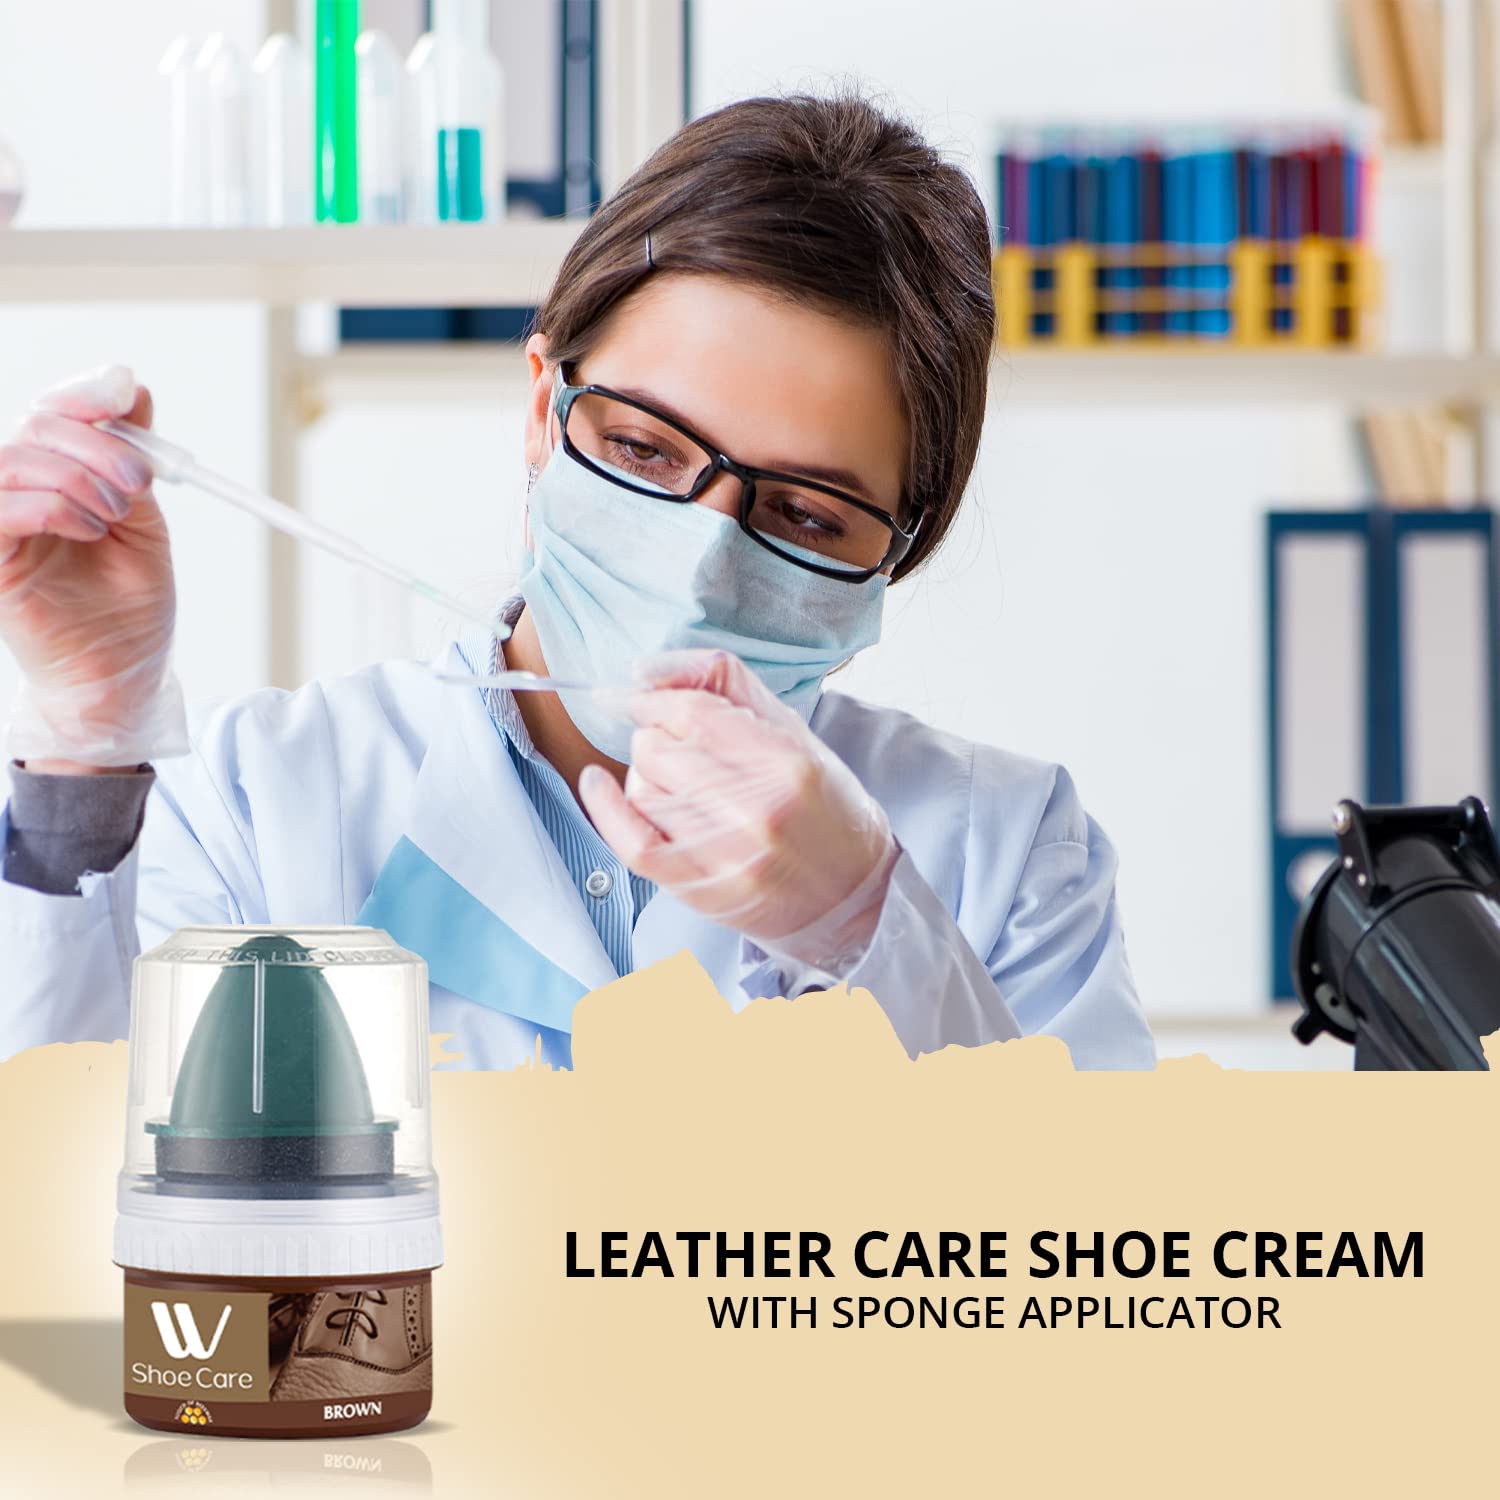 W Shoe Care Shoe Cream with Sponge Applicator, Protects Leather from Scuffs and Scratches, Best for All Kind of Leather Surfaces, Professional Shine with Black, Brown & Neutral